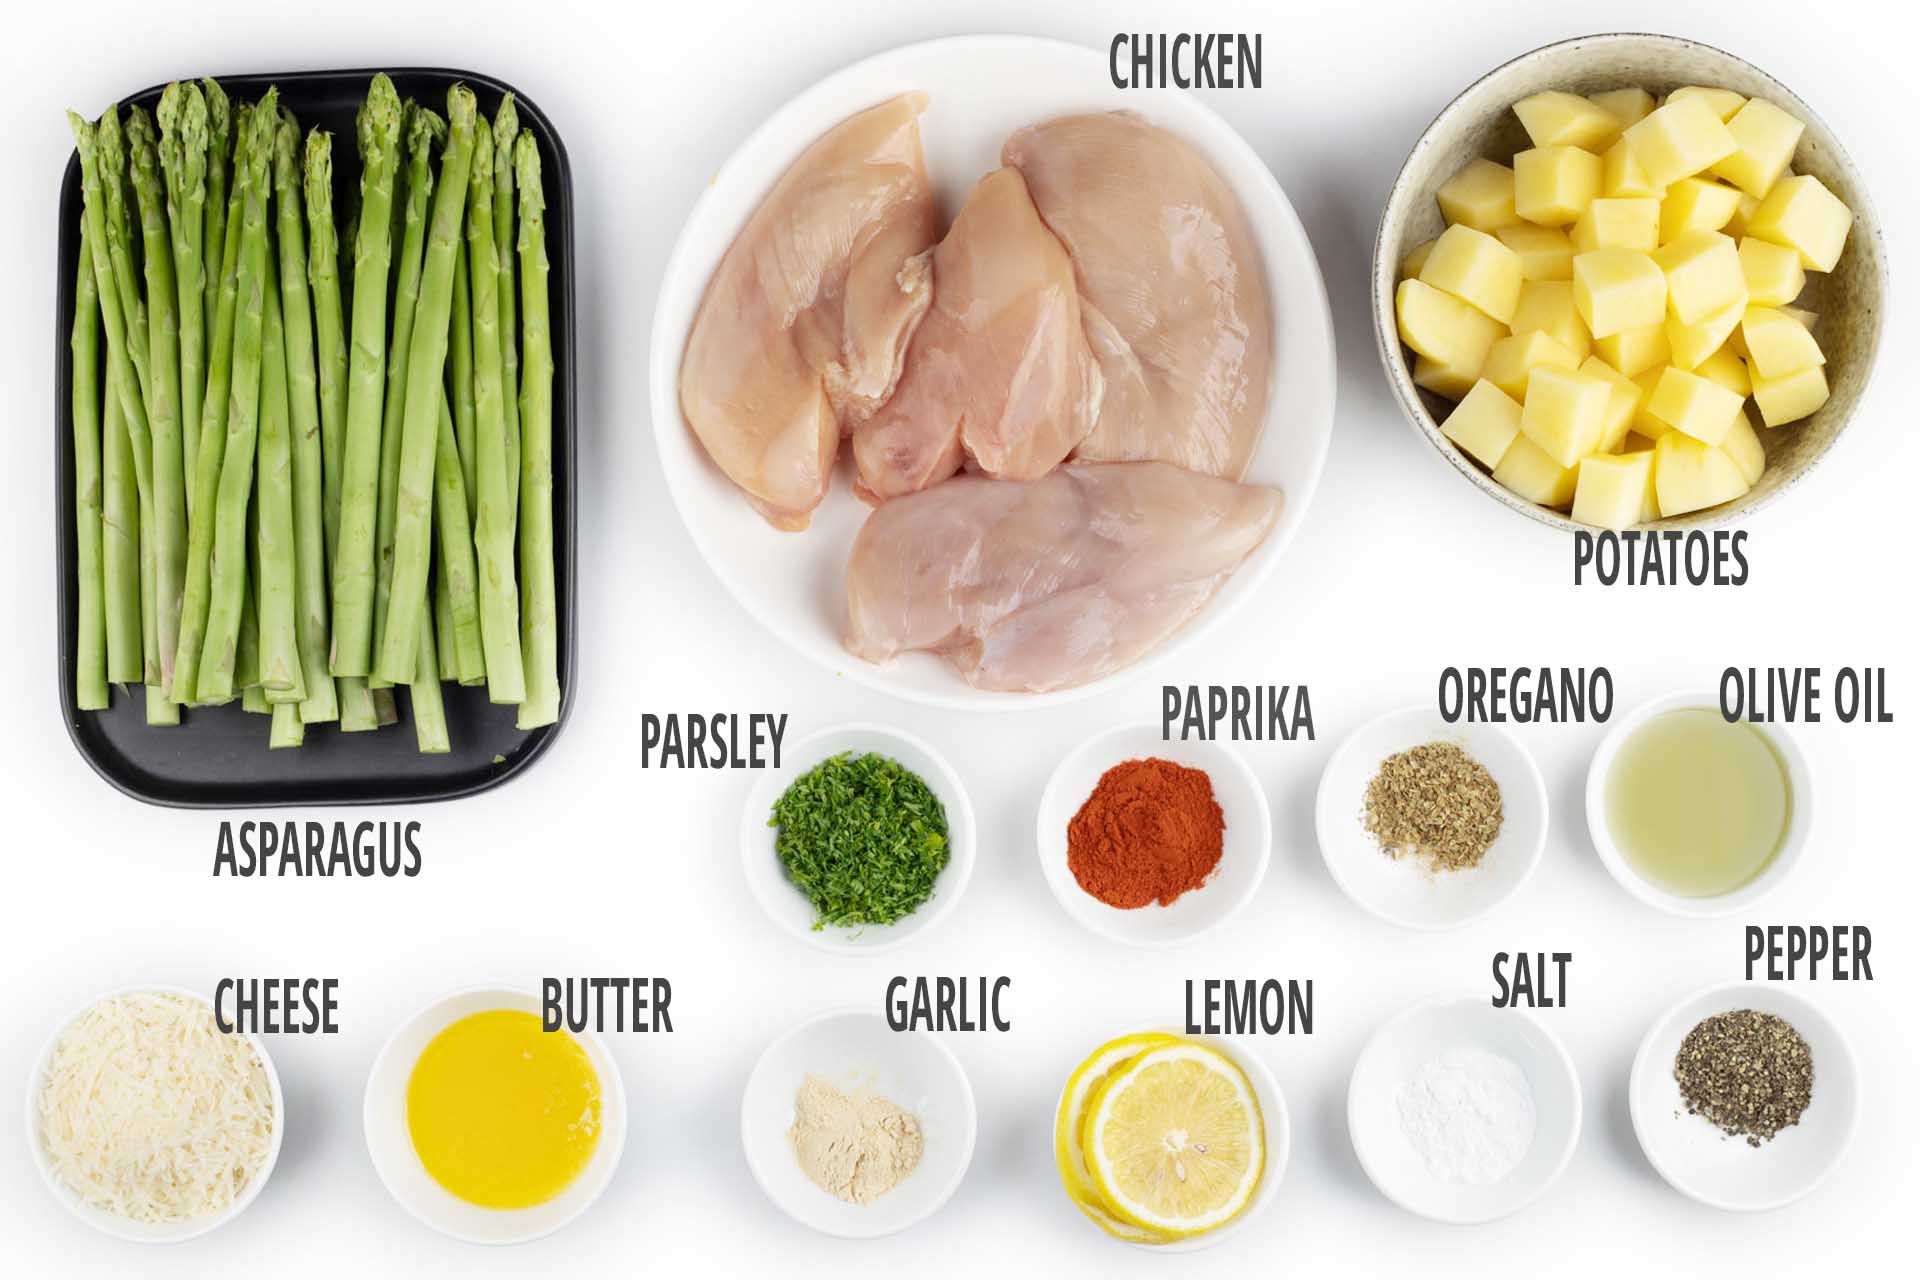 Ingredients for a Healthy Baked Chicken Breast